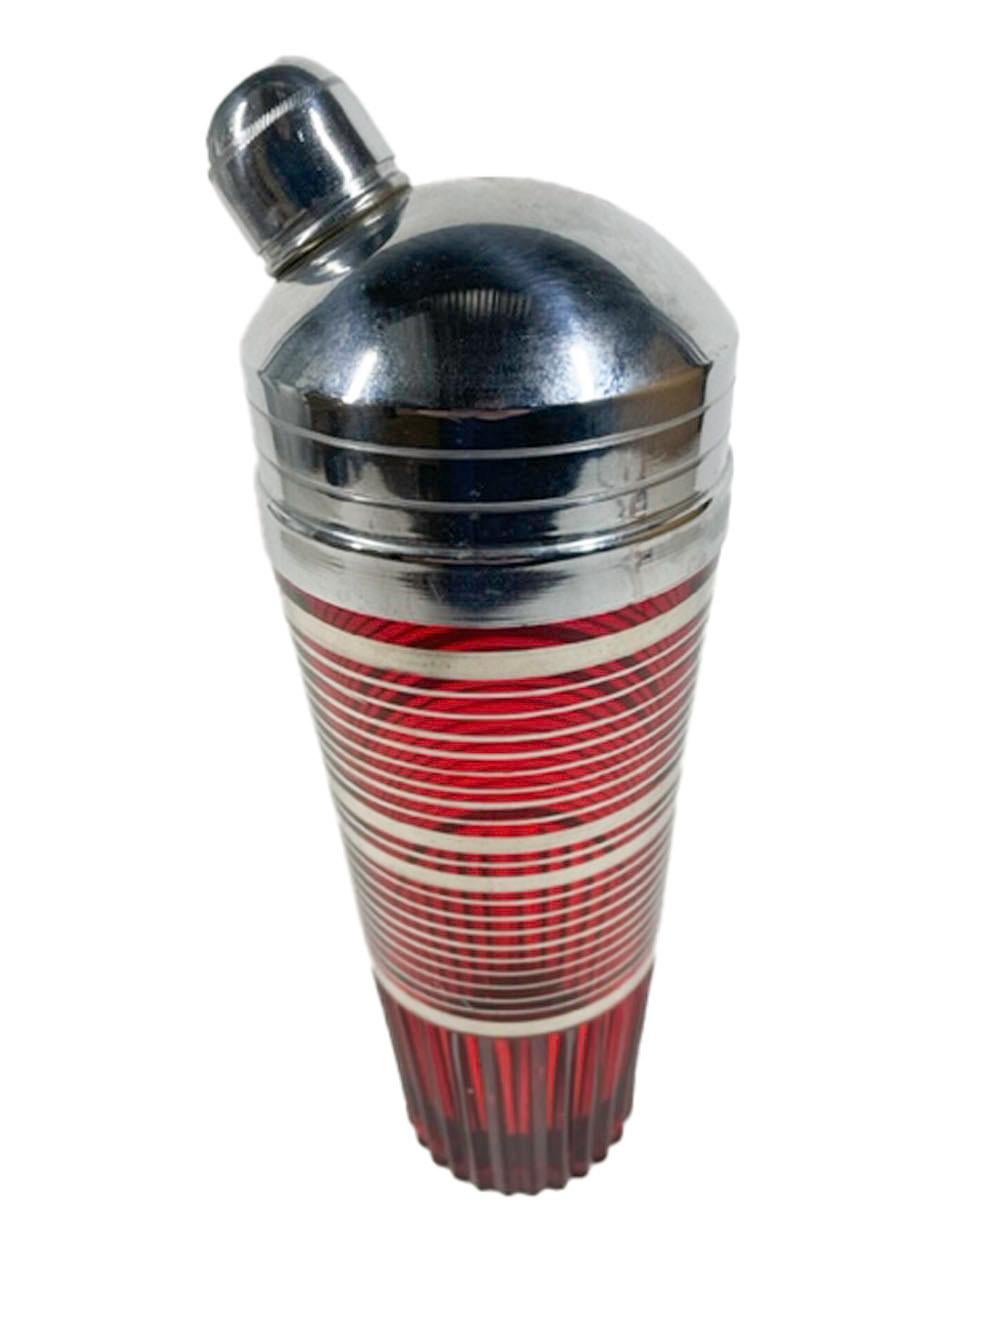 Art Deco period cocktail shaker in the Glades pattern by Paden City Glass. In ruby red glass with silver bands above a rib molded base and with a high-domed chrome lid with angled spout.